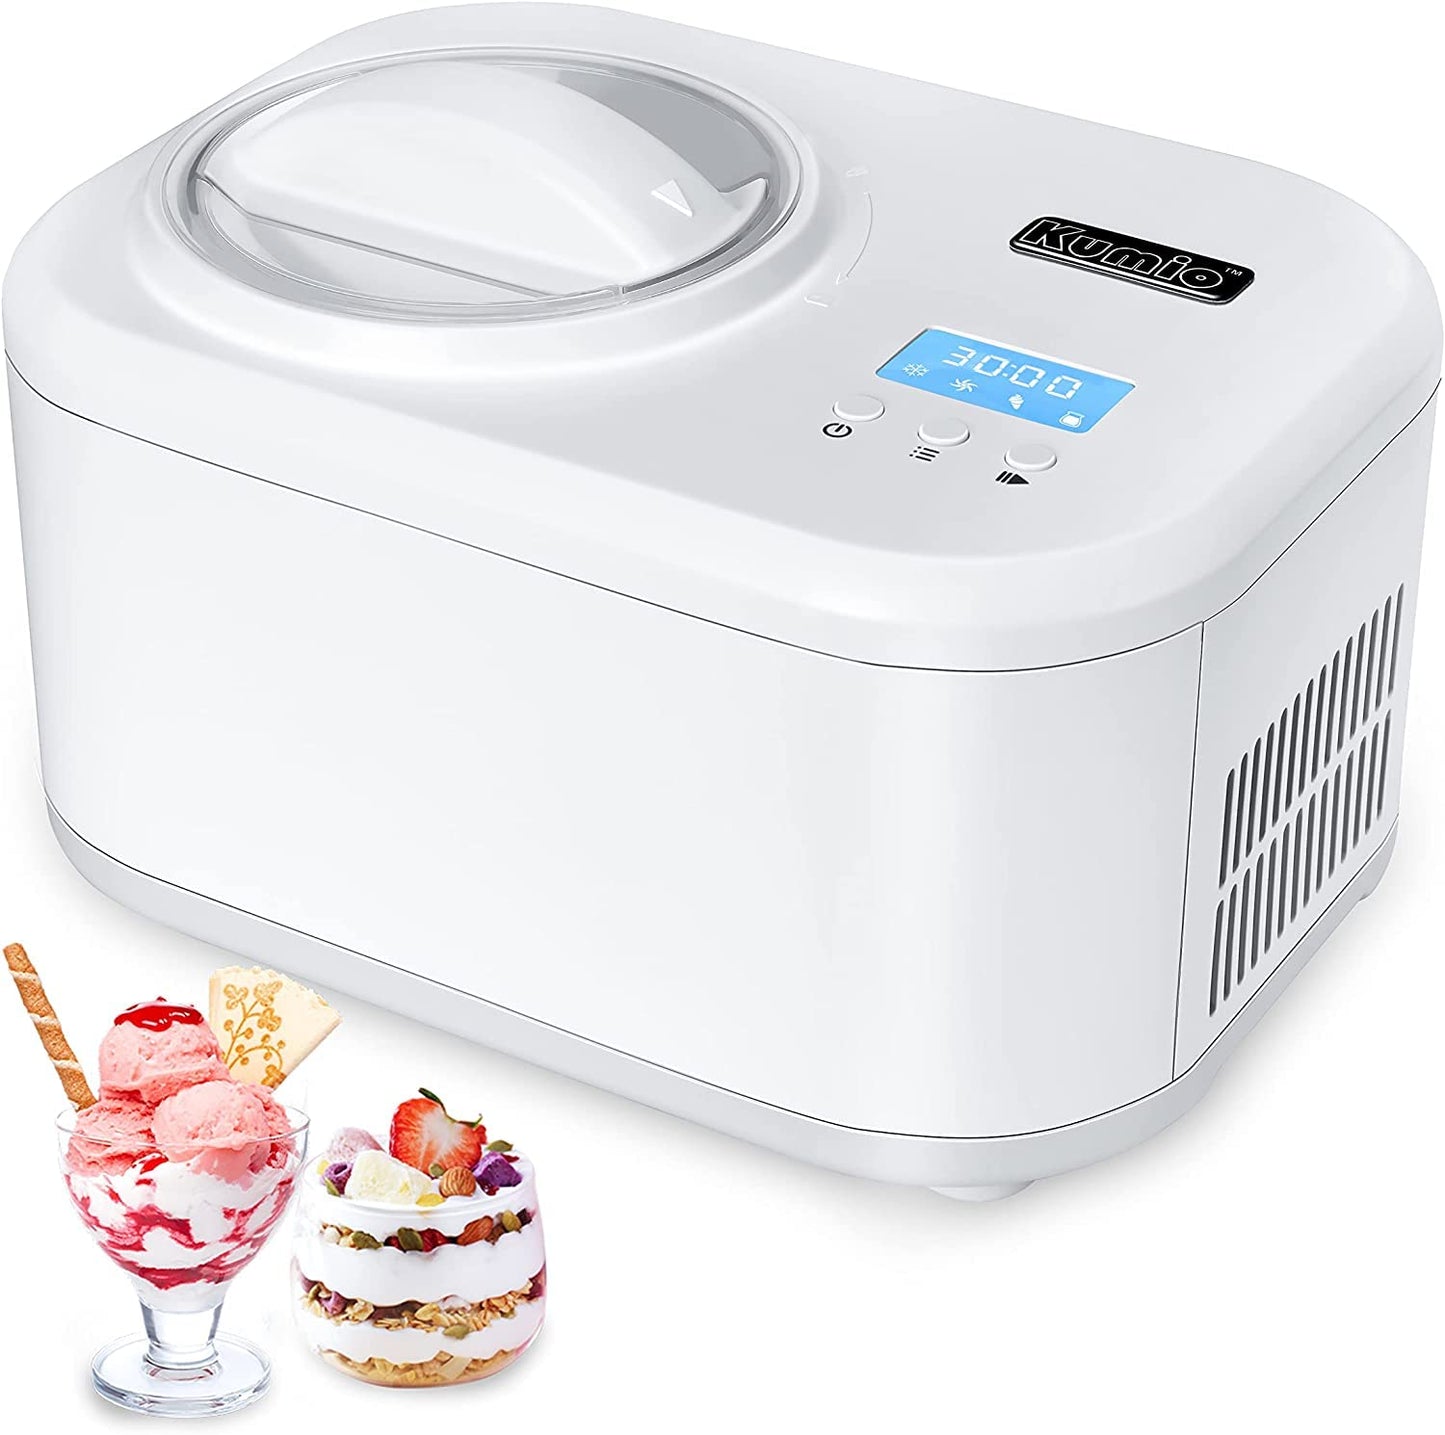 KUMIO Electric Ice Cream Maker with Self-Cooling Compressor, LCD Display and Timer, White